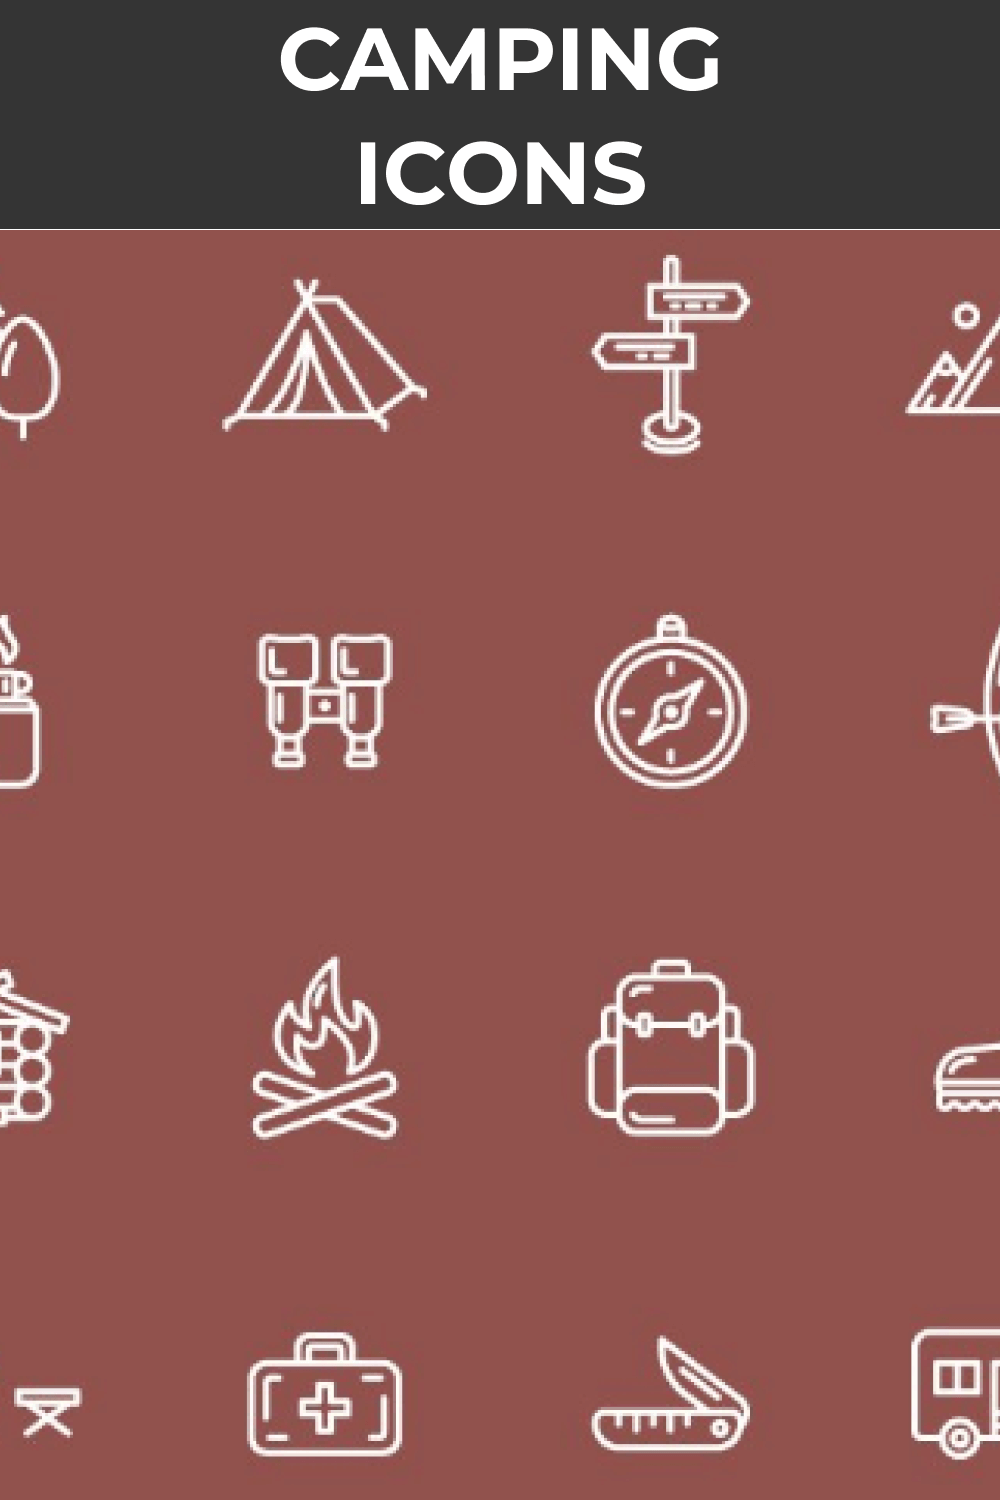 Big Camping Icons on red background.